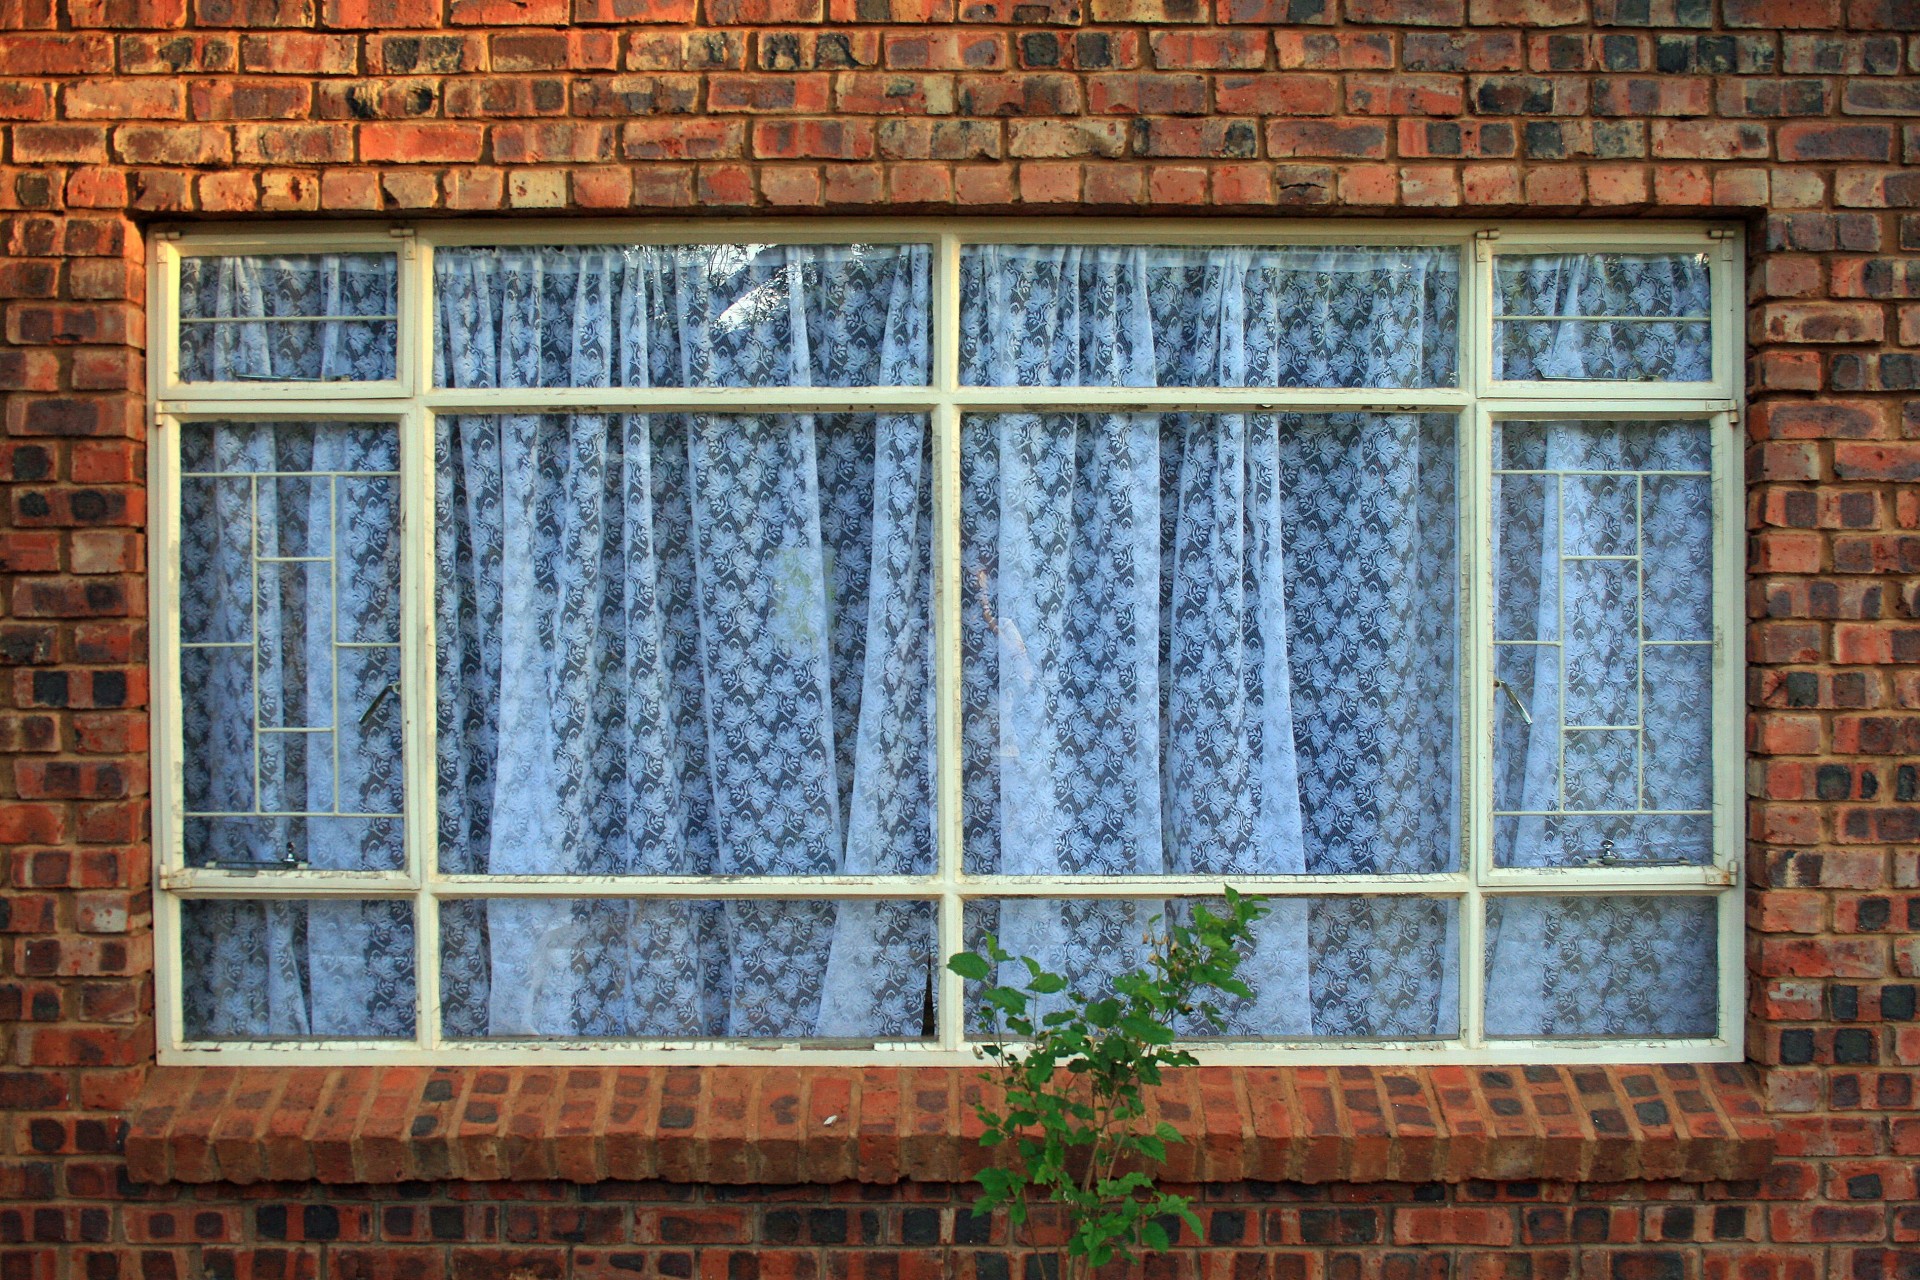 Window With Lace Curtain